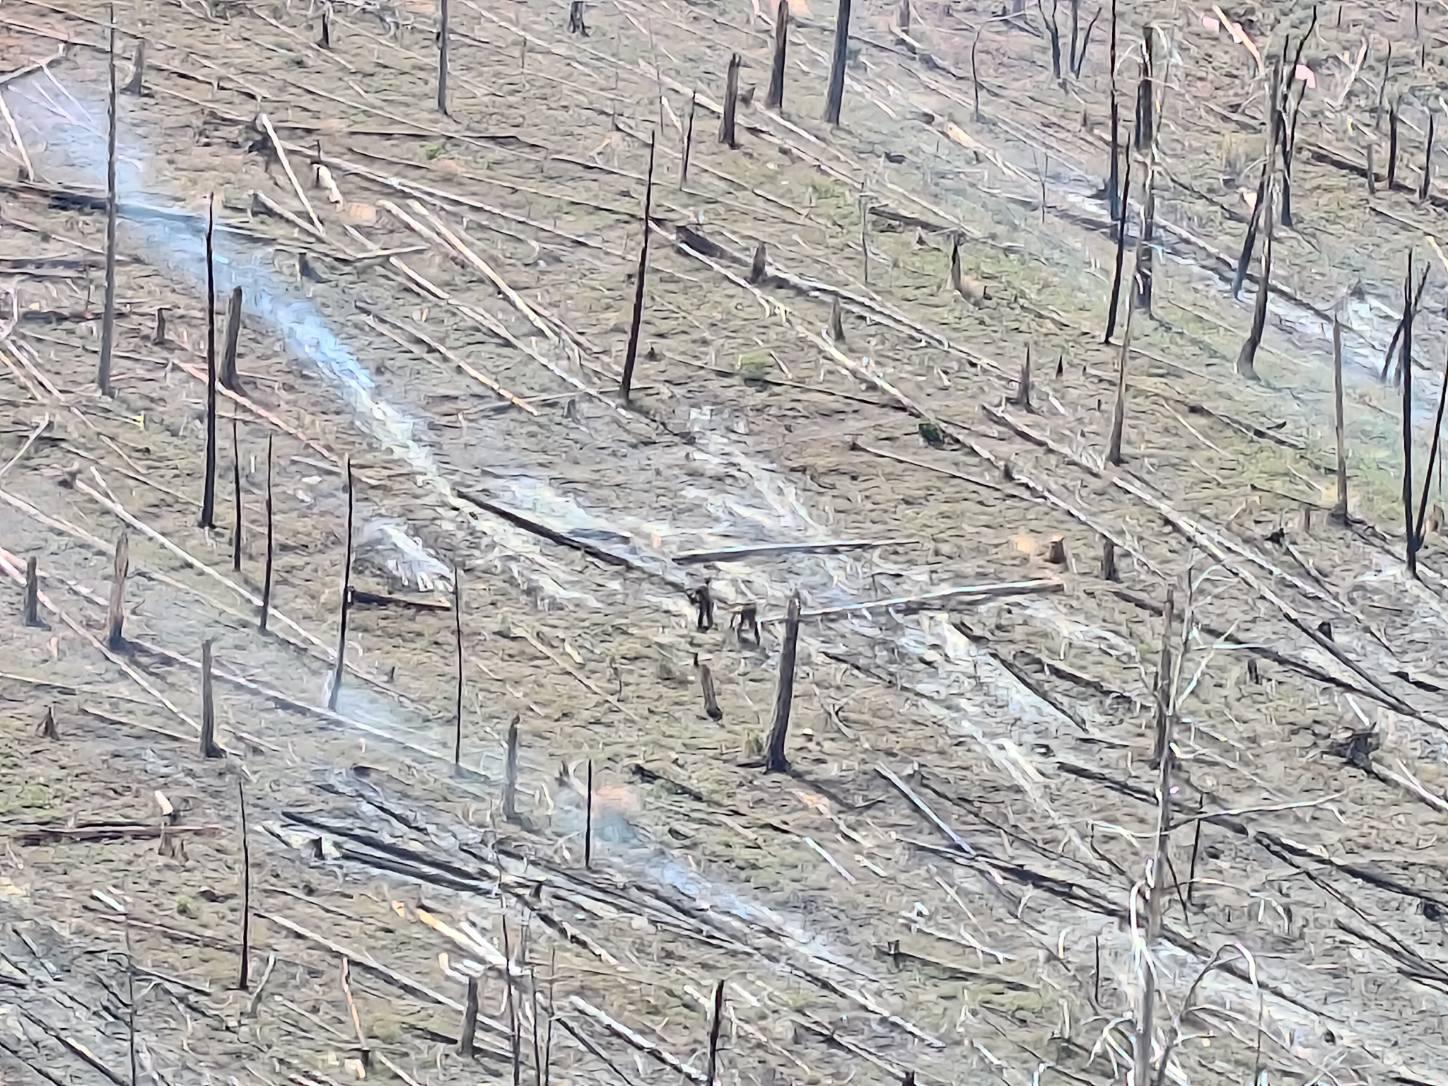 View from the ridge of Firefighters searching for hotspots inside the fire perimeter of the BLue 2 Fire